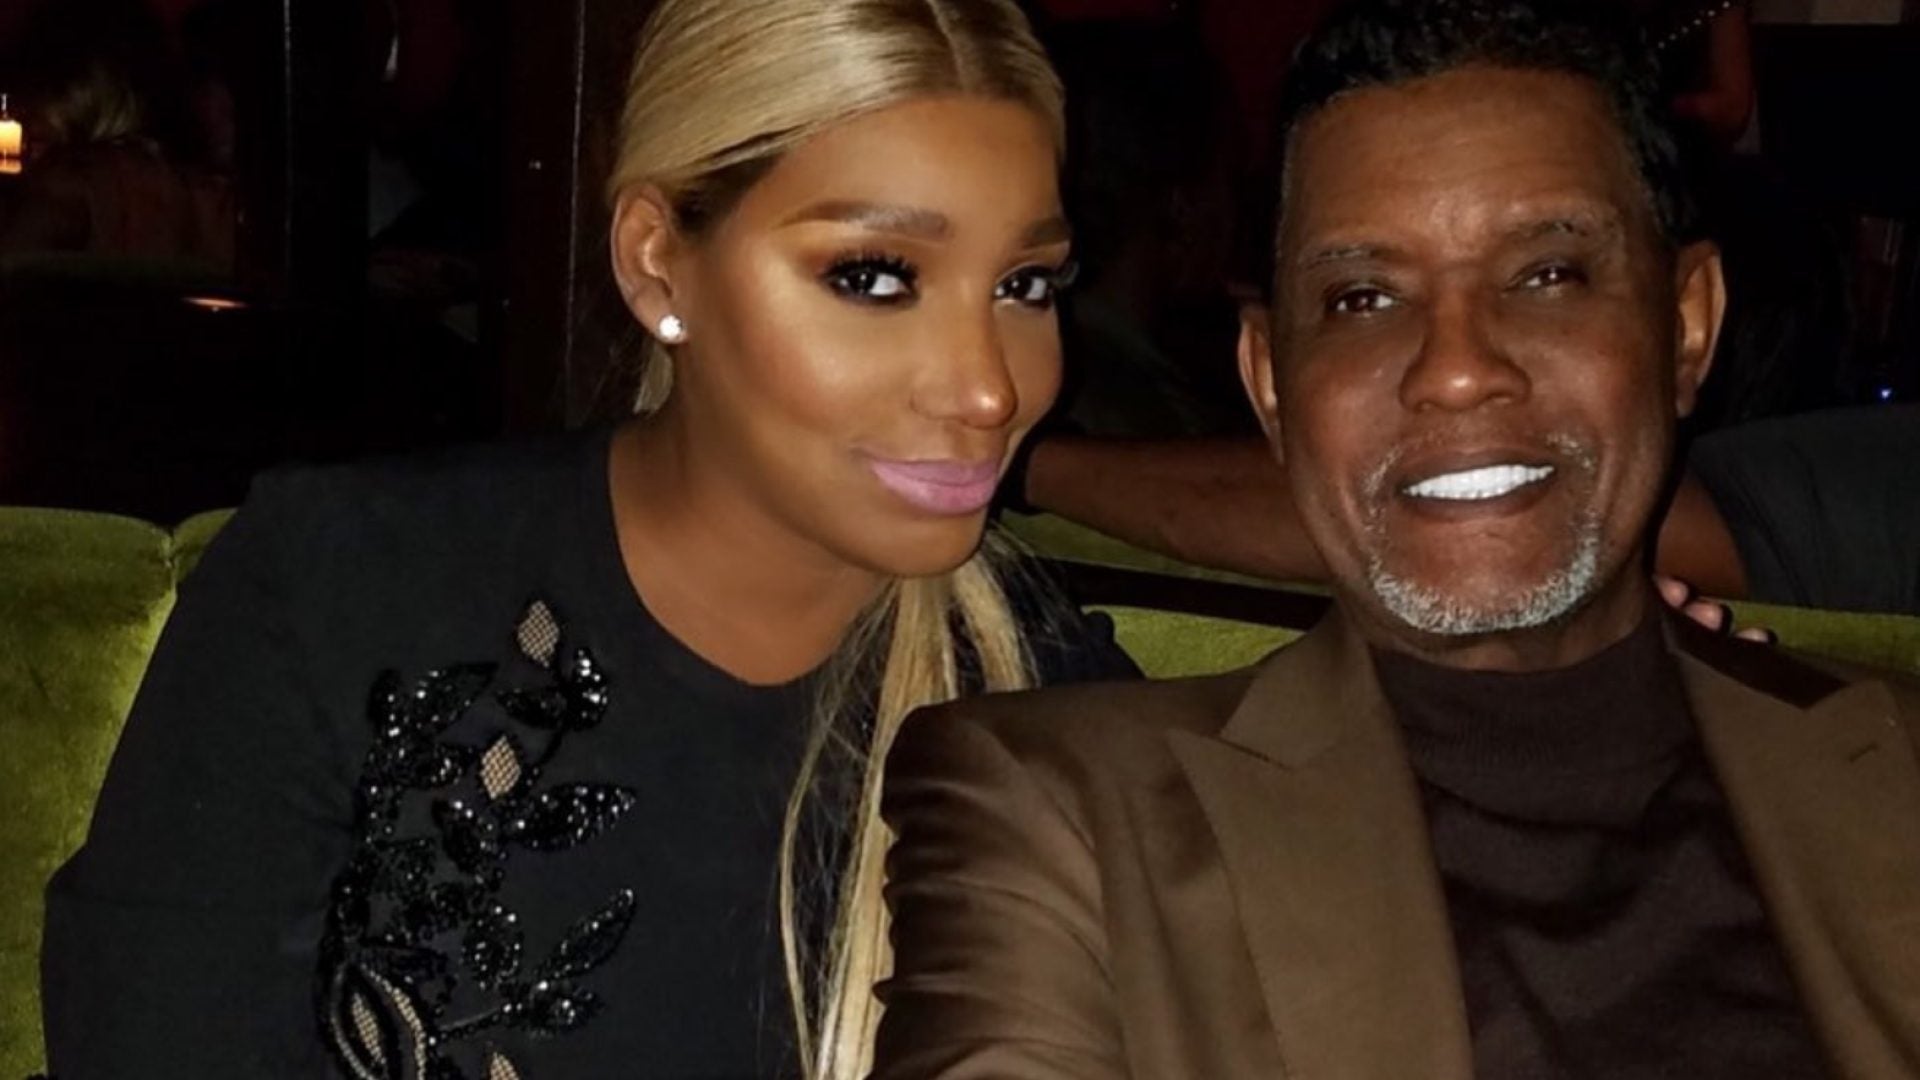 NeNe Leakes On Her Last Conversation With Gregg: 'He Wanted Me To Move On With My Life'